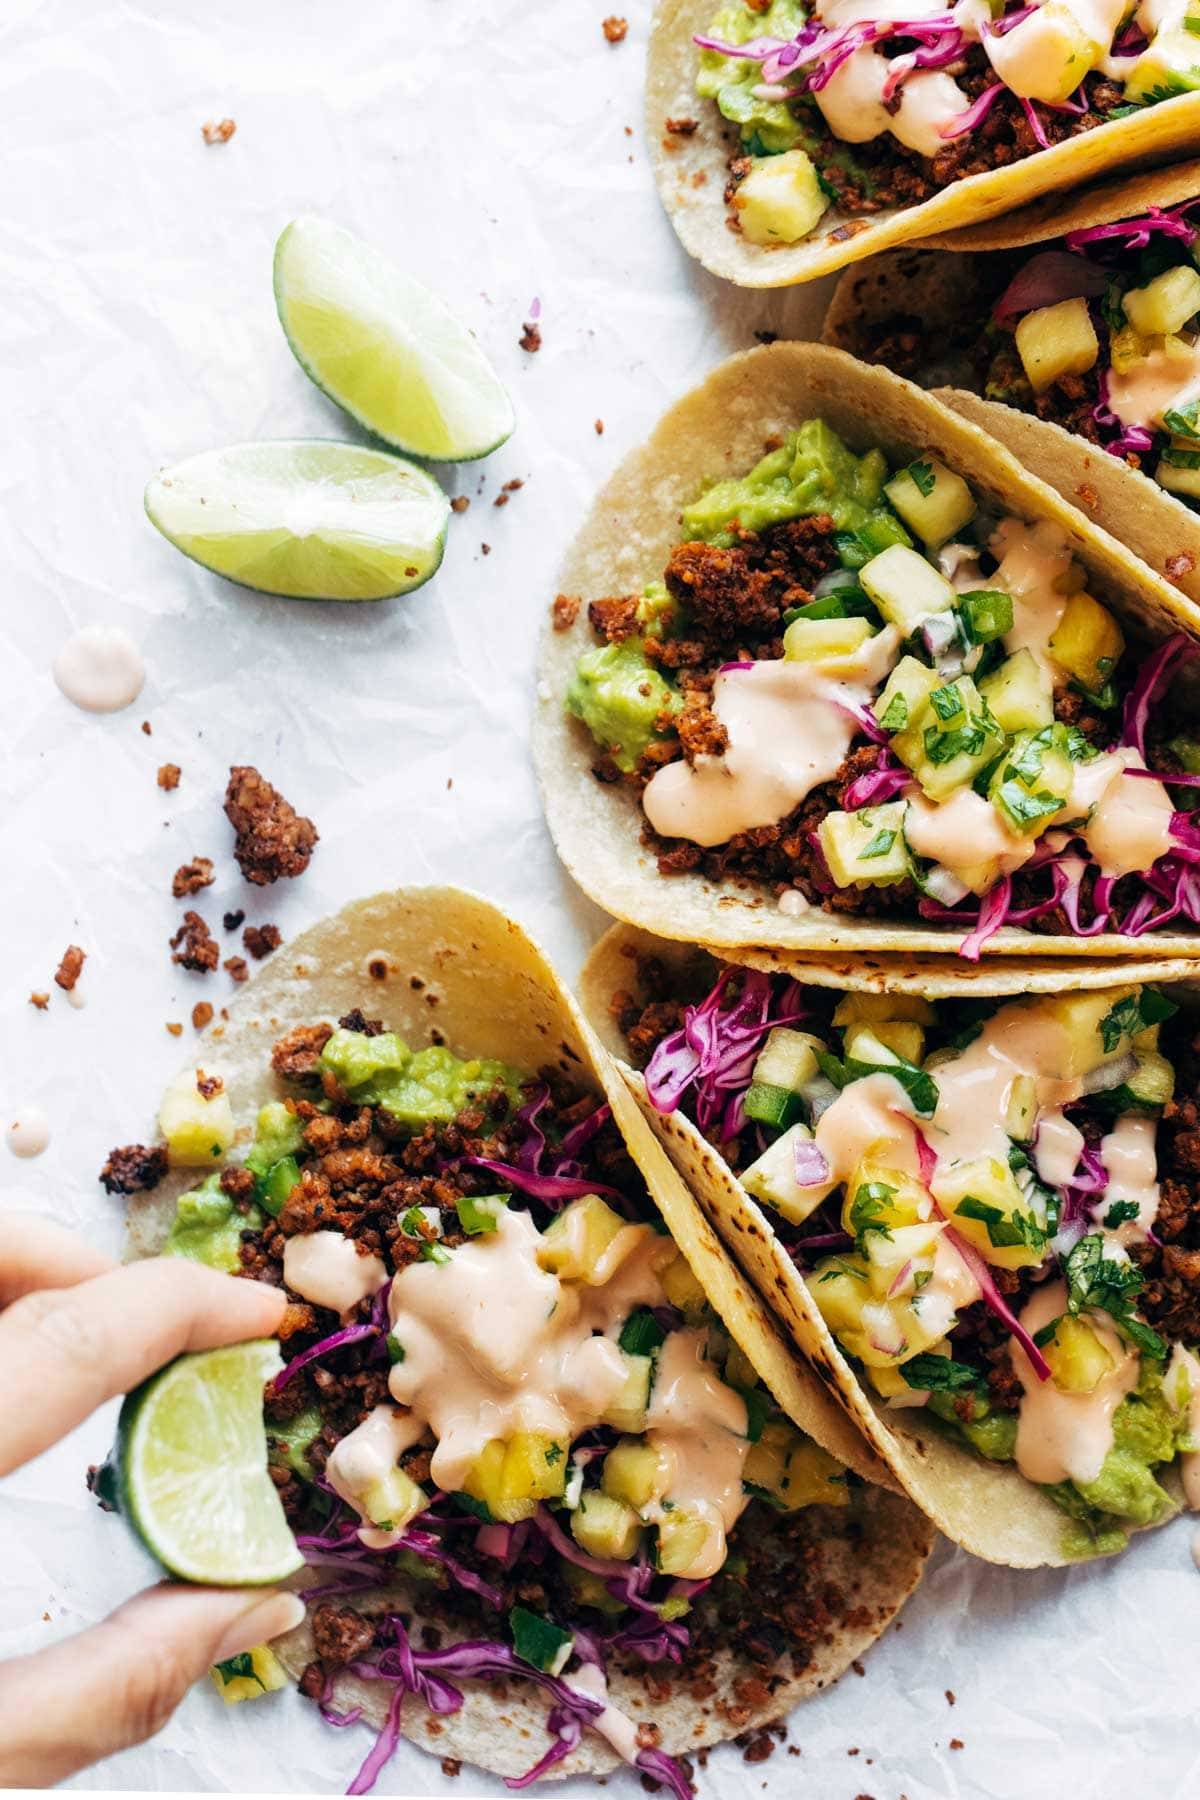 A hand squeezes lime into tacos.